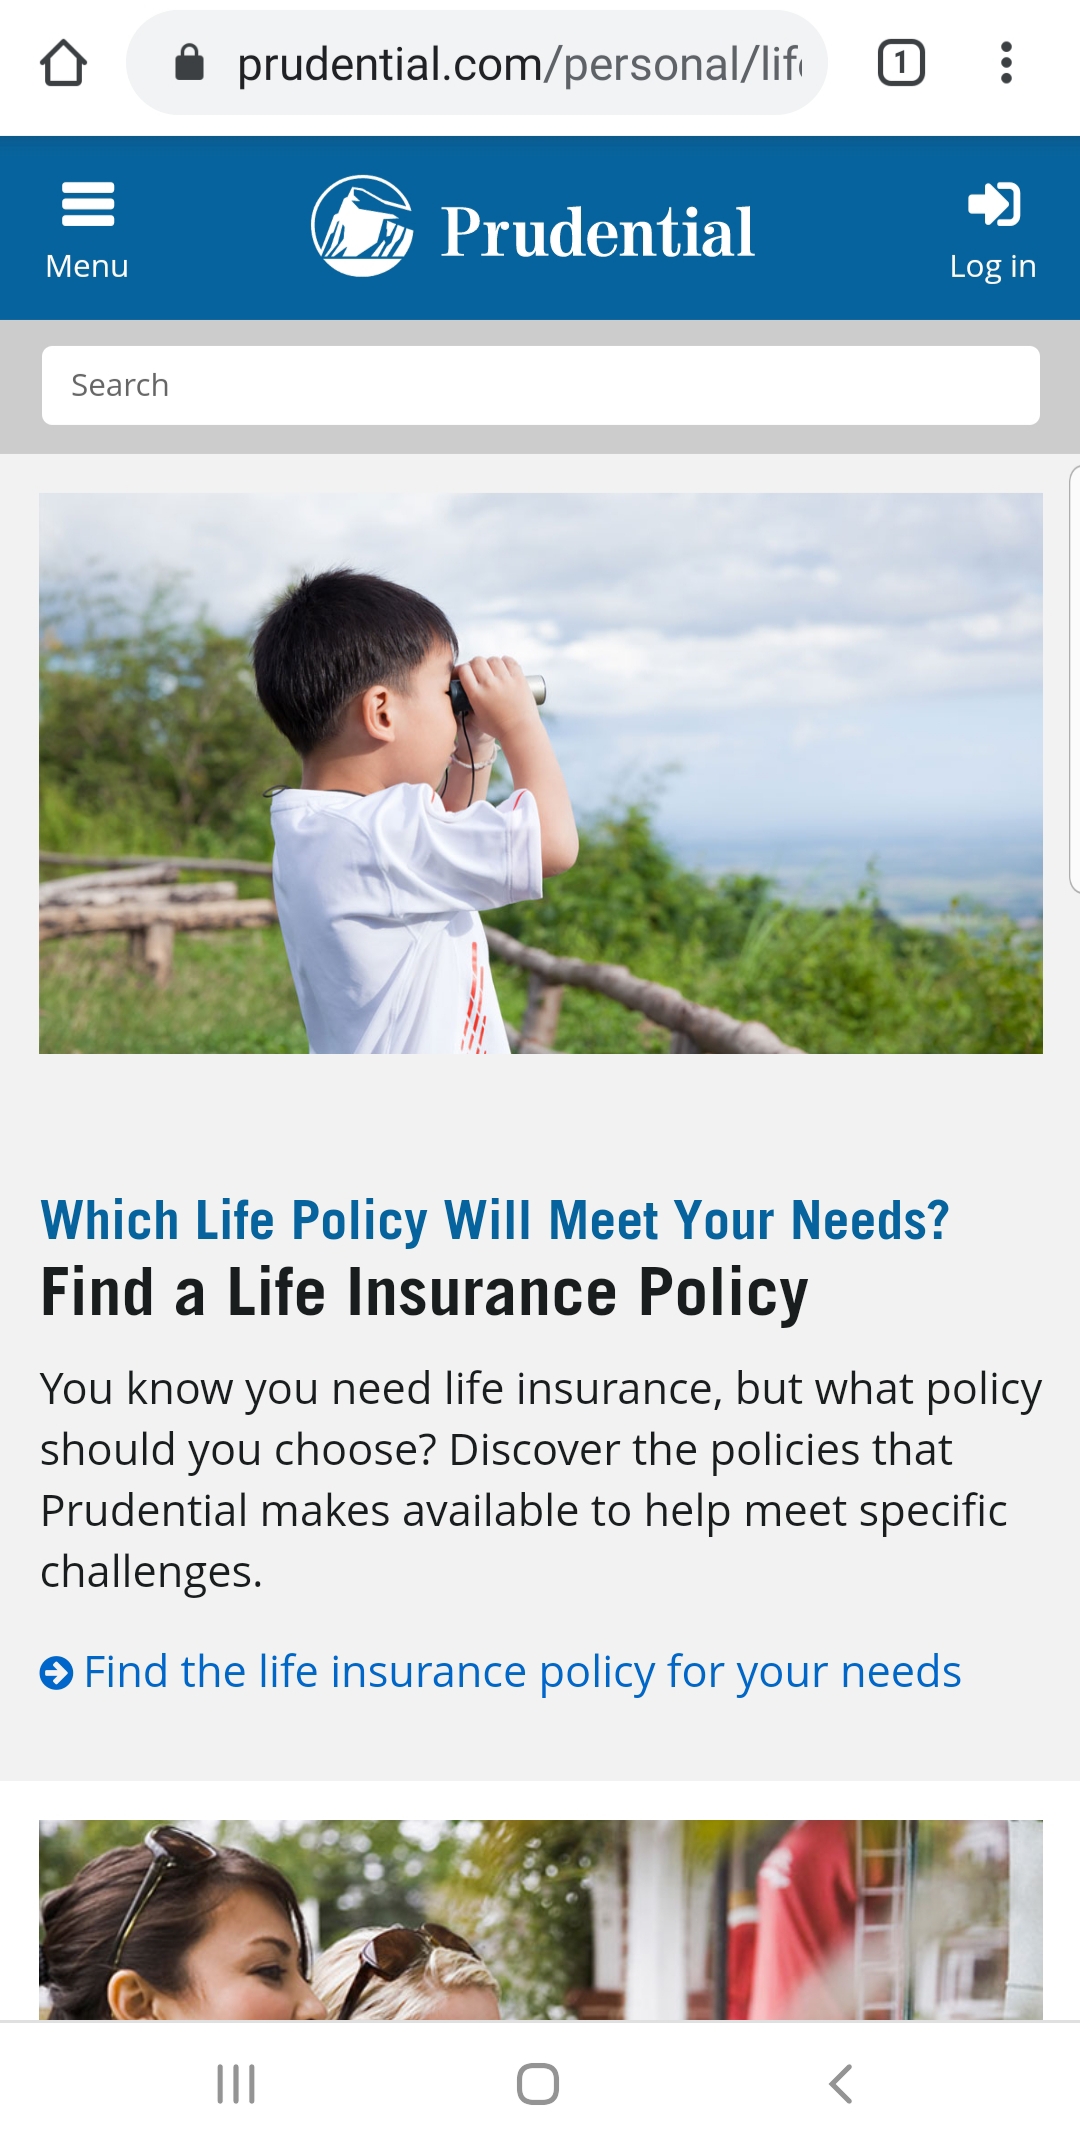 Prudential mobile homepage.